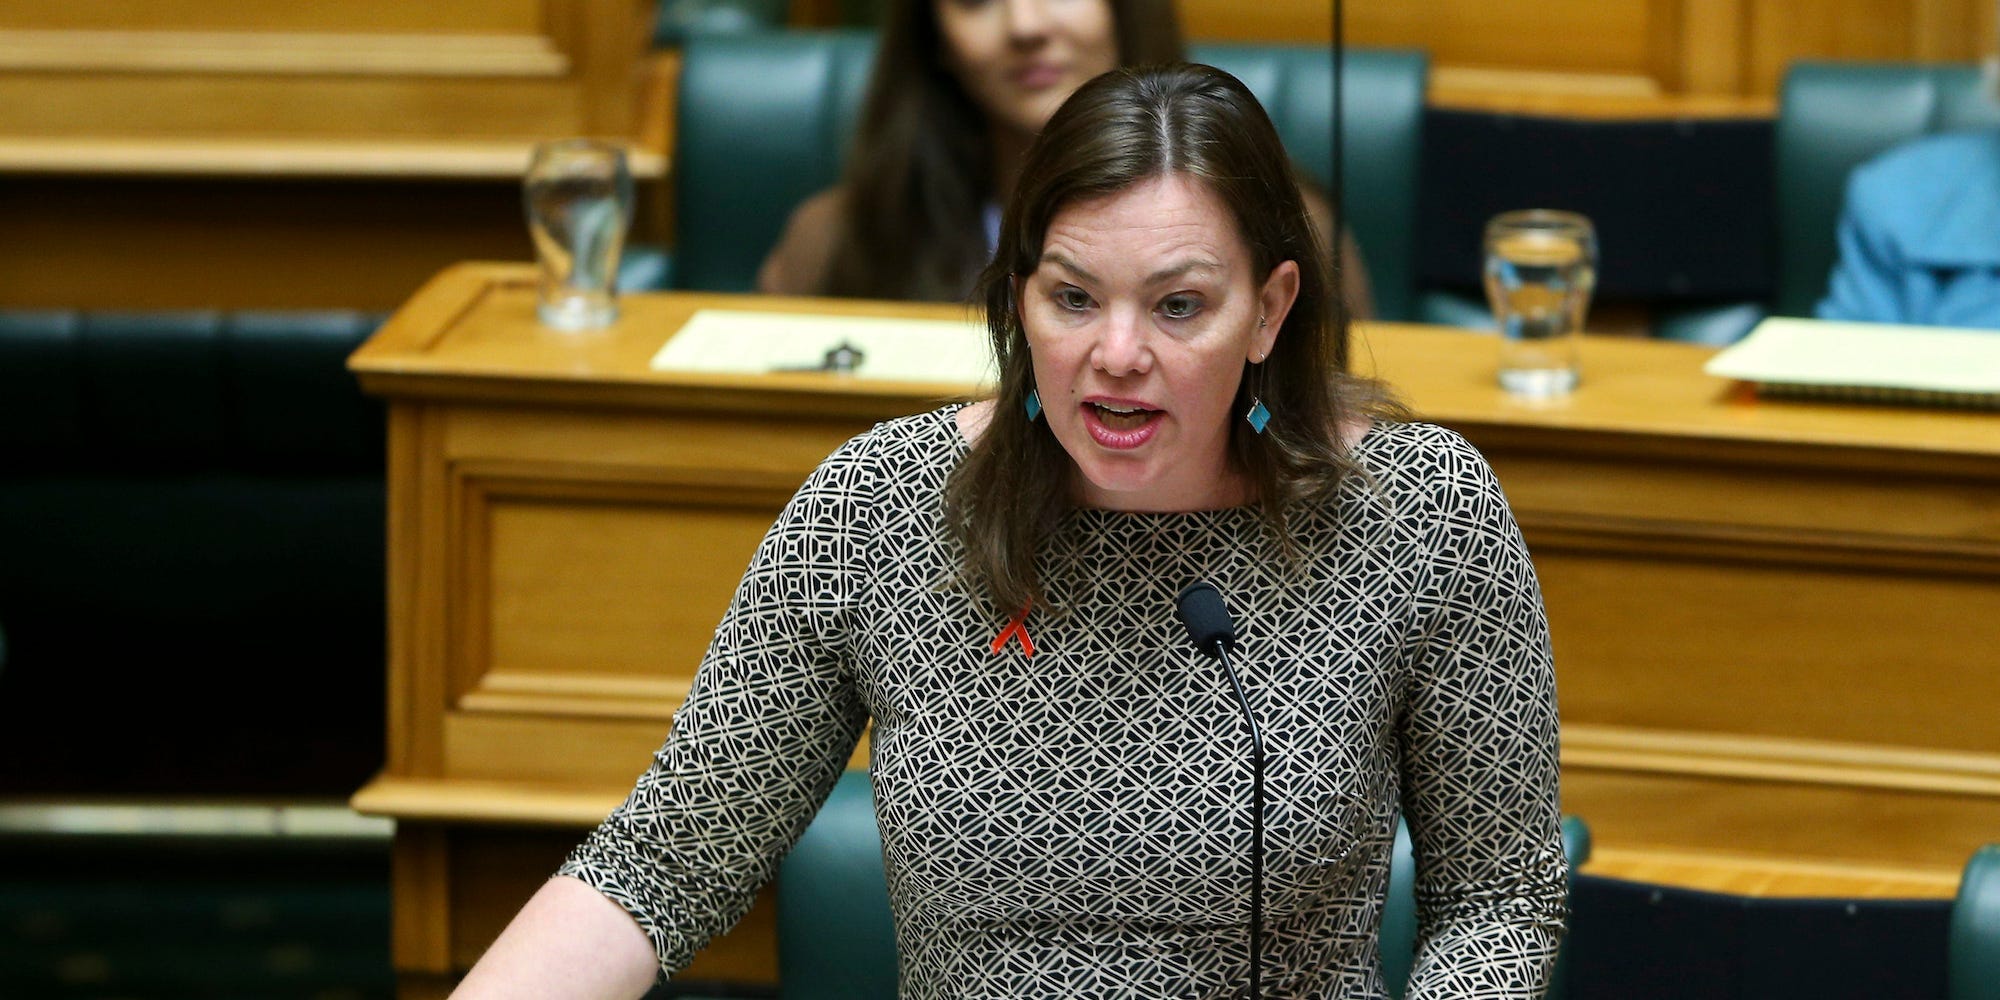 Green MP Julie Anne Genter speaks during the first sitting day of New Zealand's 53rd Parliament on December 01, 2020 in Wellington, New Zealand.